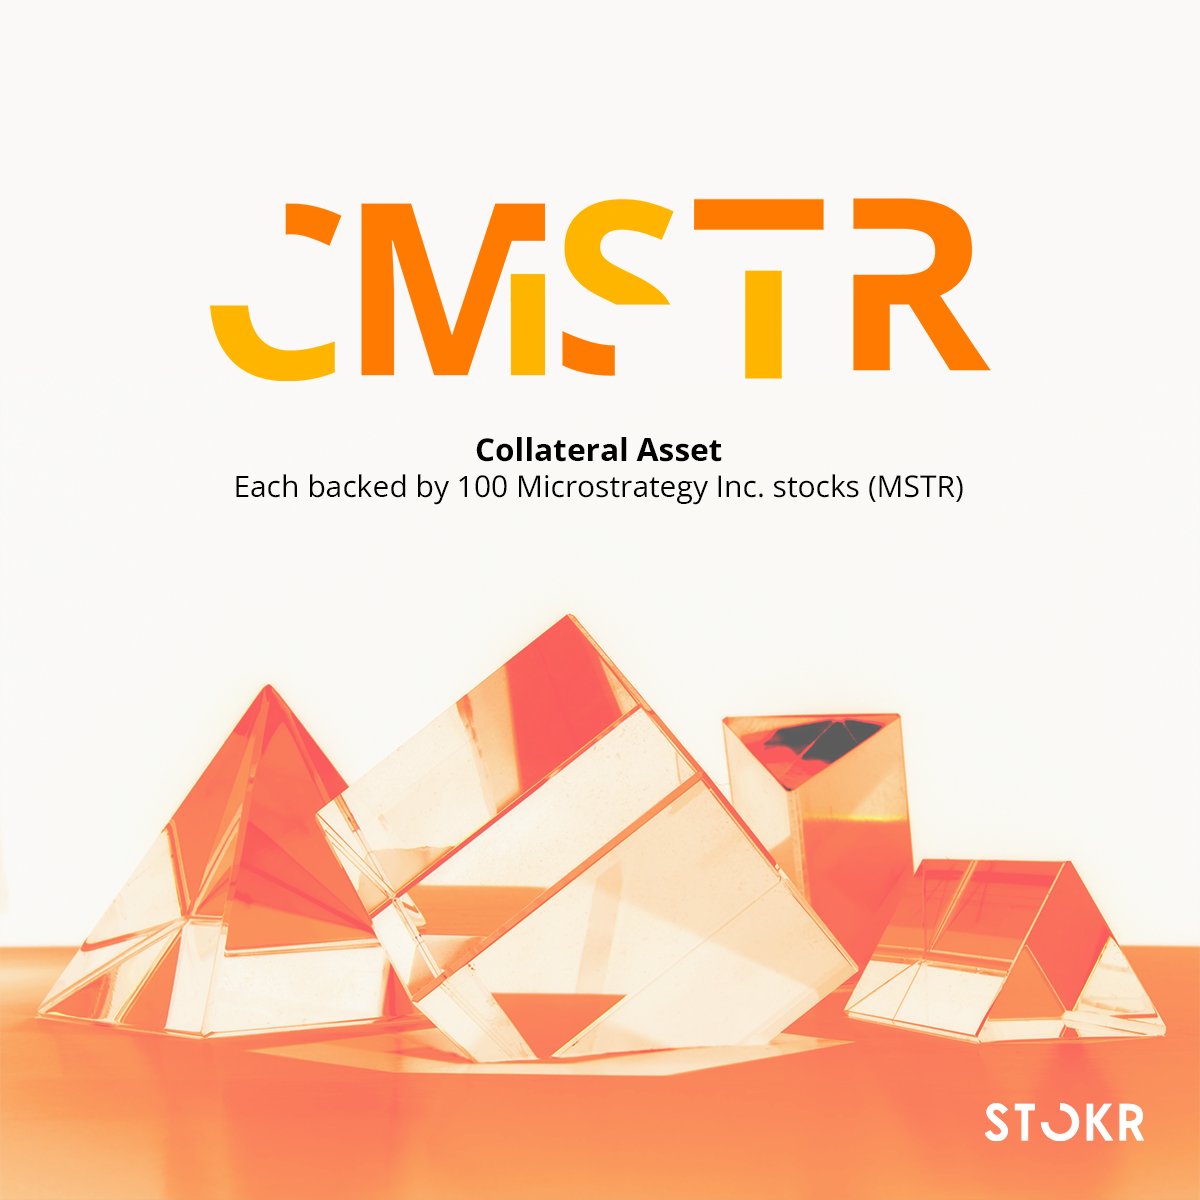 🚀 Exciting News from STOKR! We're excited to announce our first public markets RWA product: CMSTR Notes- each fully backed by 100 shares of MicroStrategy Inc. Class A ($MSTR). 📈 Initial subscription: 4,000 shares 💰 Total value: $5,129,520 USD Issued from a Luxembourg…